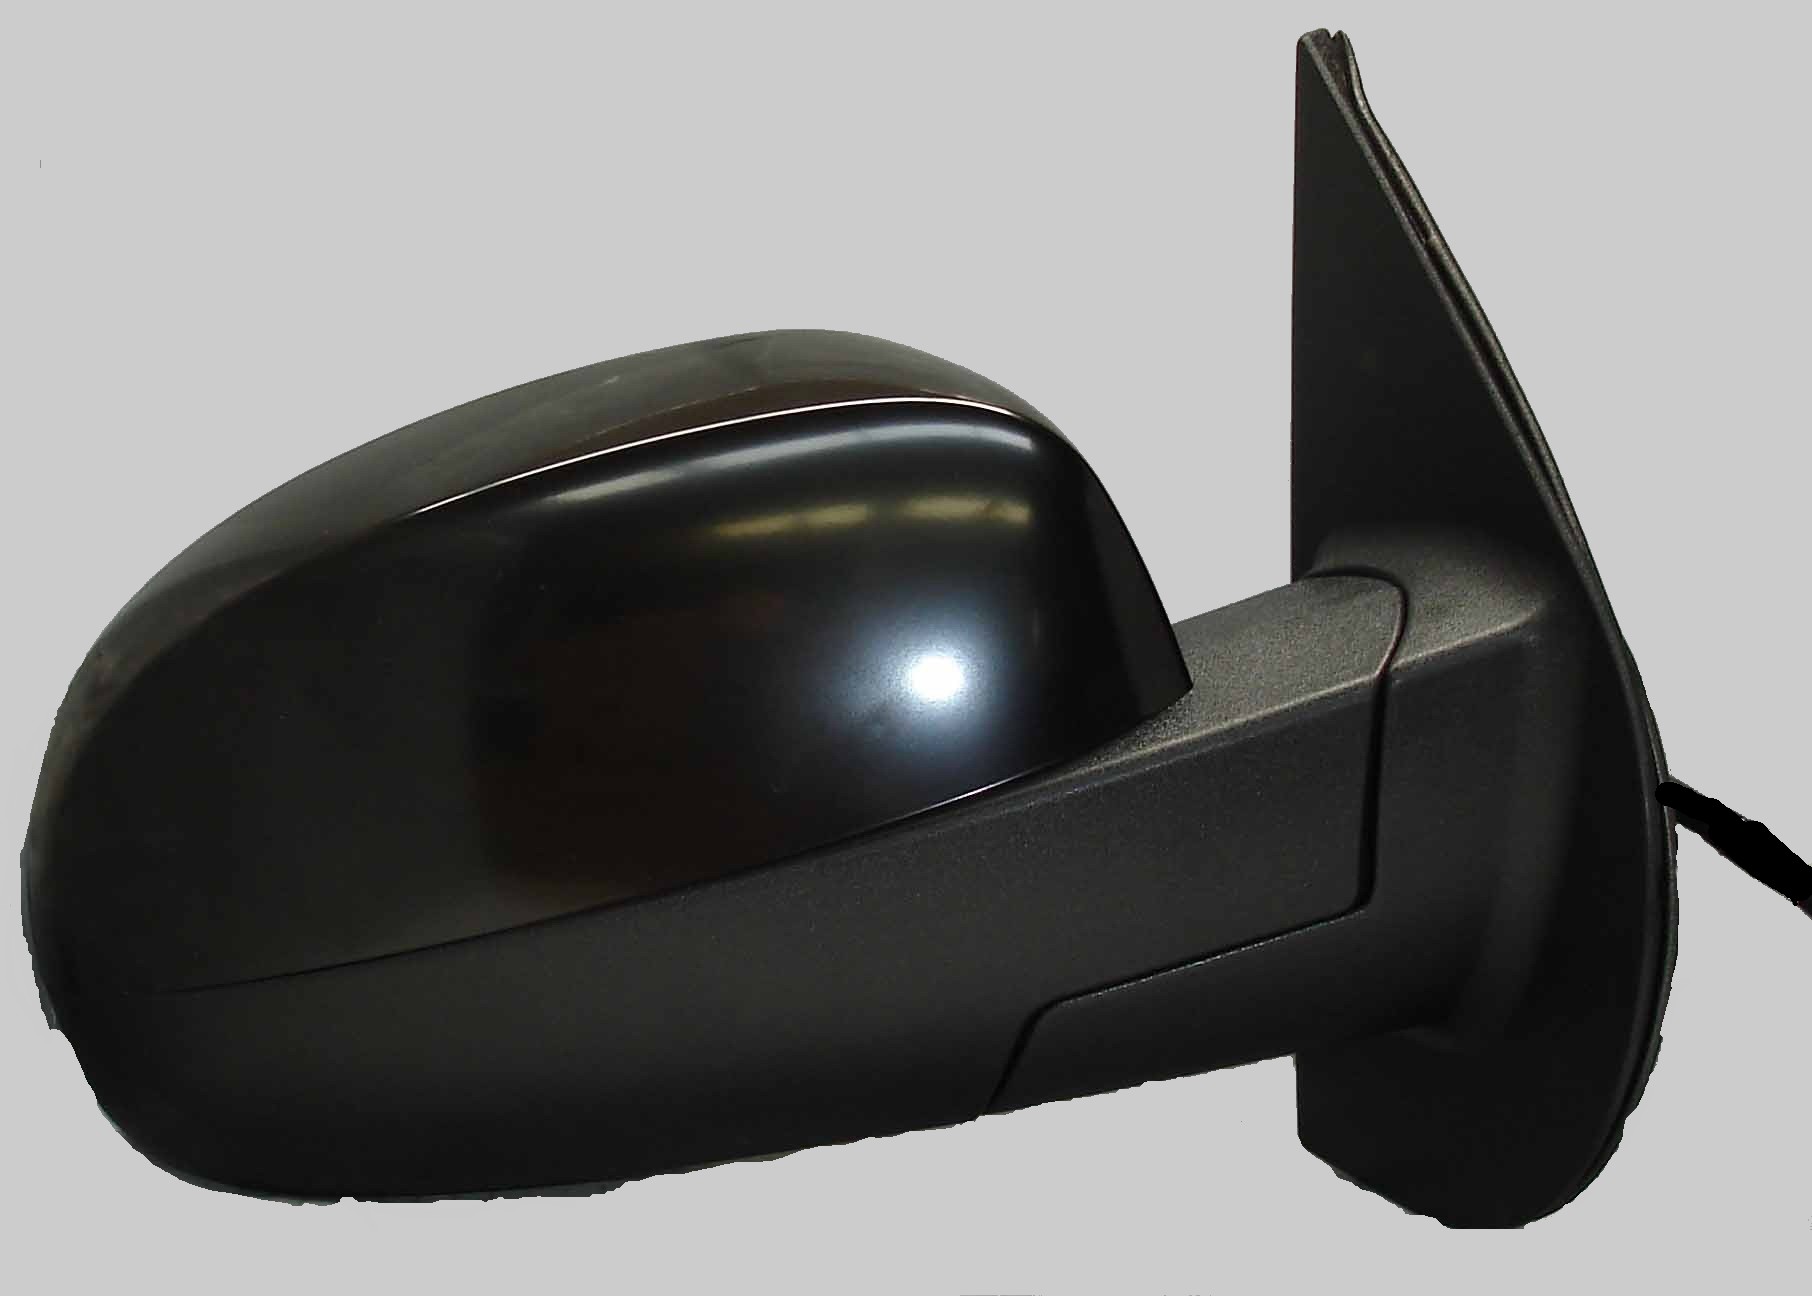 Aftermarket MIRRORS for CHEVROLET - SUBURBAN 1500, SUBURBAN 1500,07-14,LT Mirror outside rear view